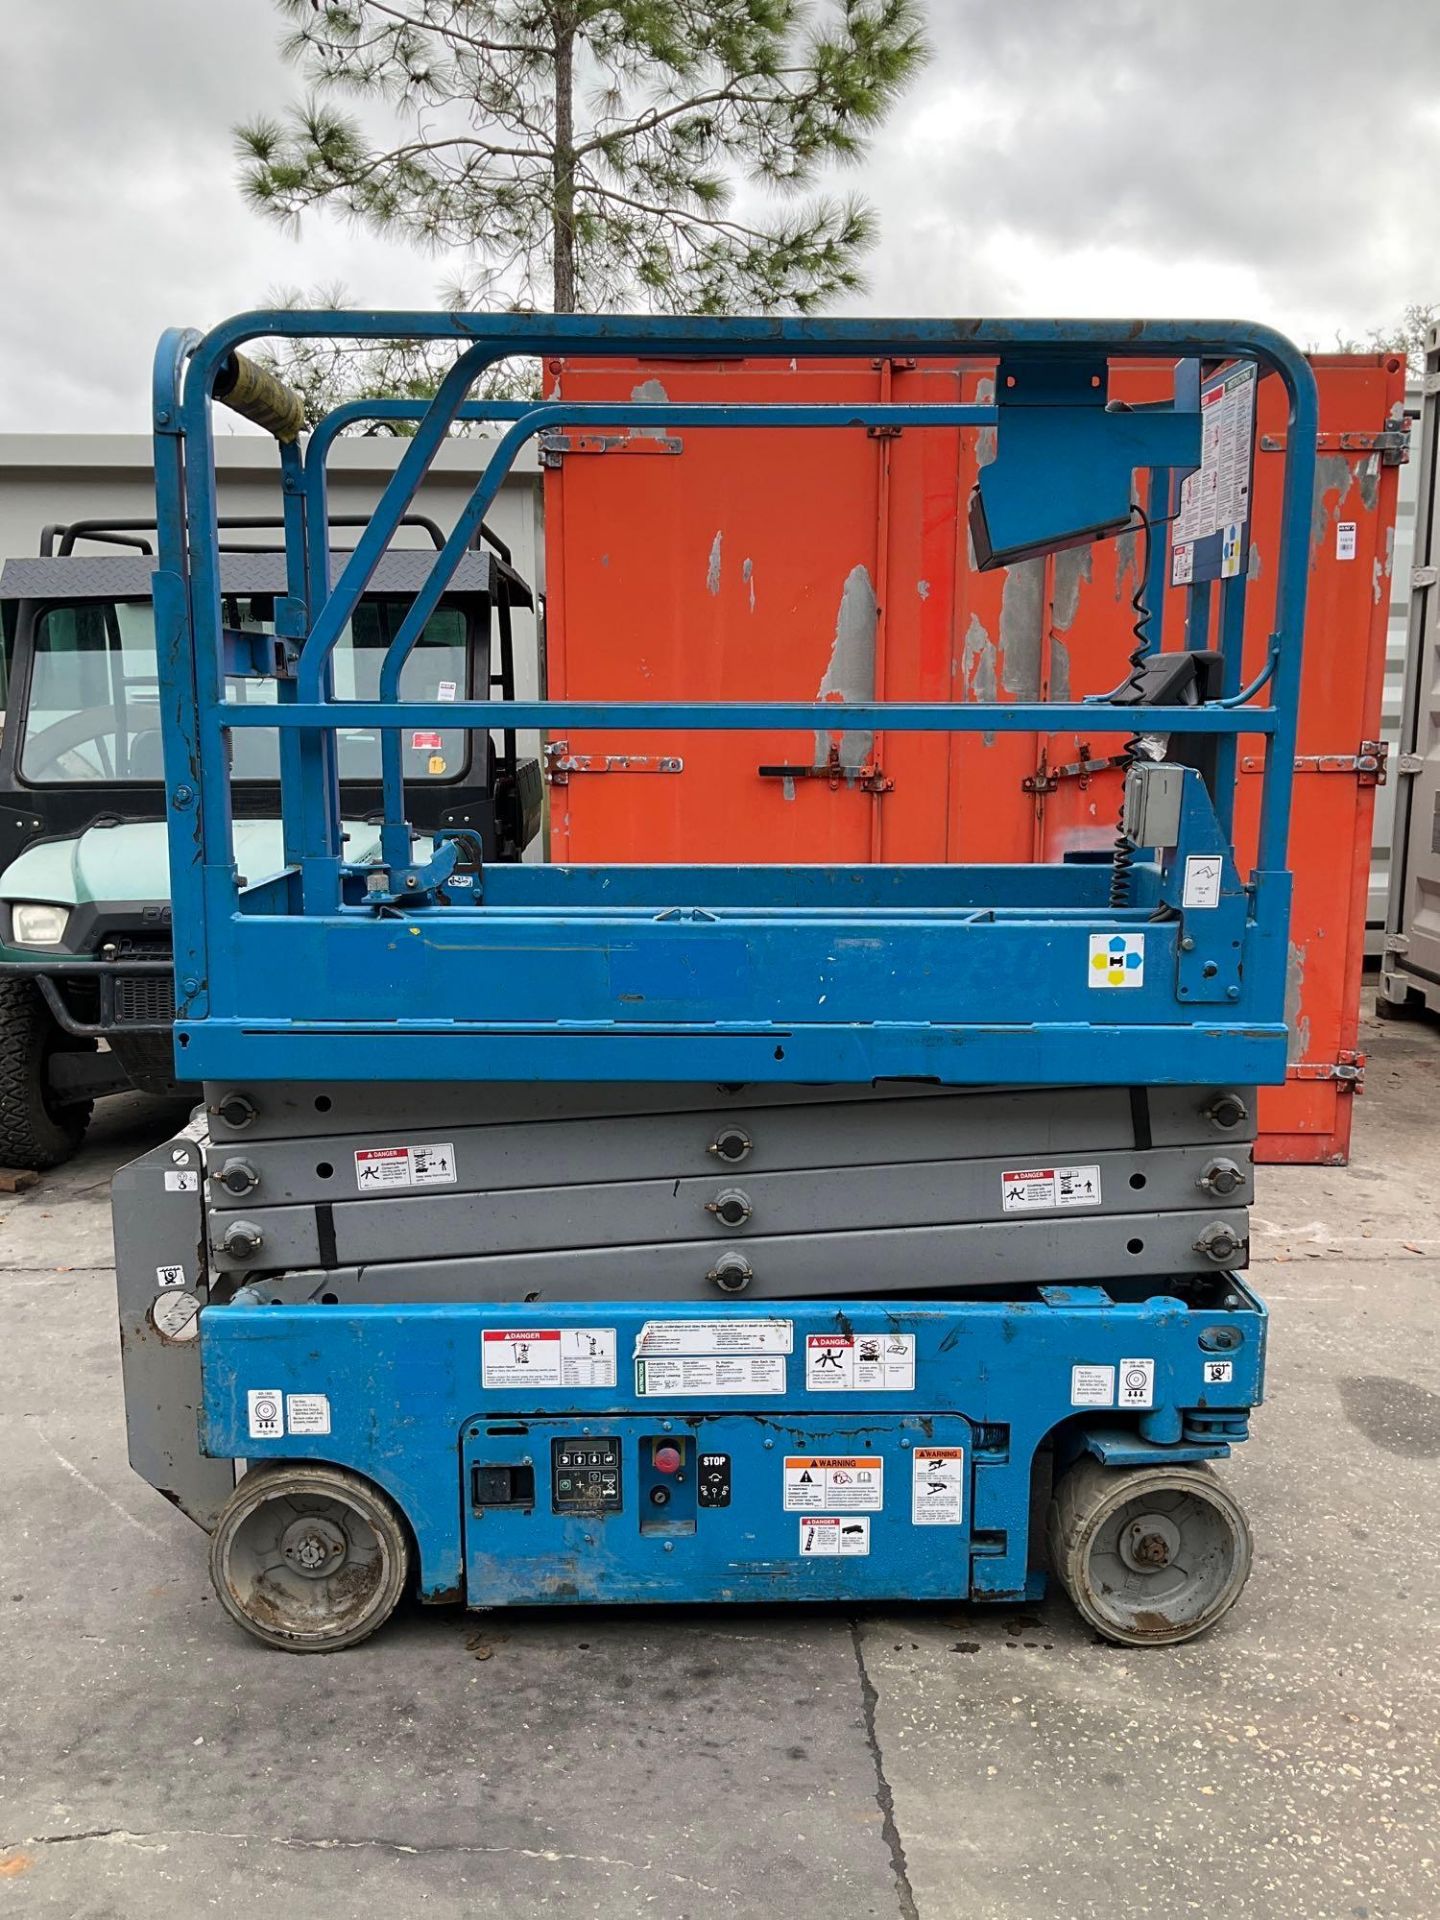 GENIE SCISSOR LIFT MODEL GS1930, ELECTRIC, APPROX MAX PLATFORM HEIGHT 19FT, BUILT IN BATTERY CHARGER - Image 6 of 16